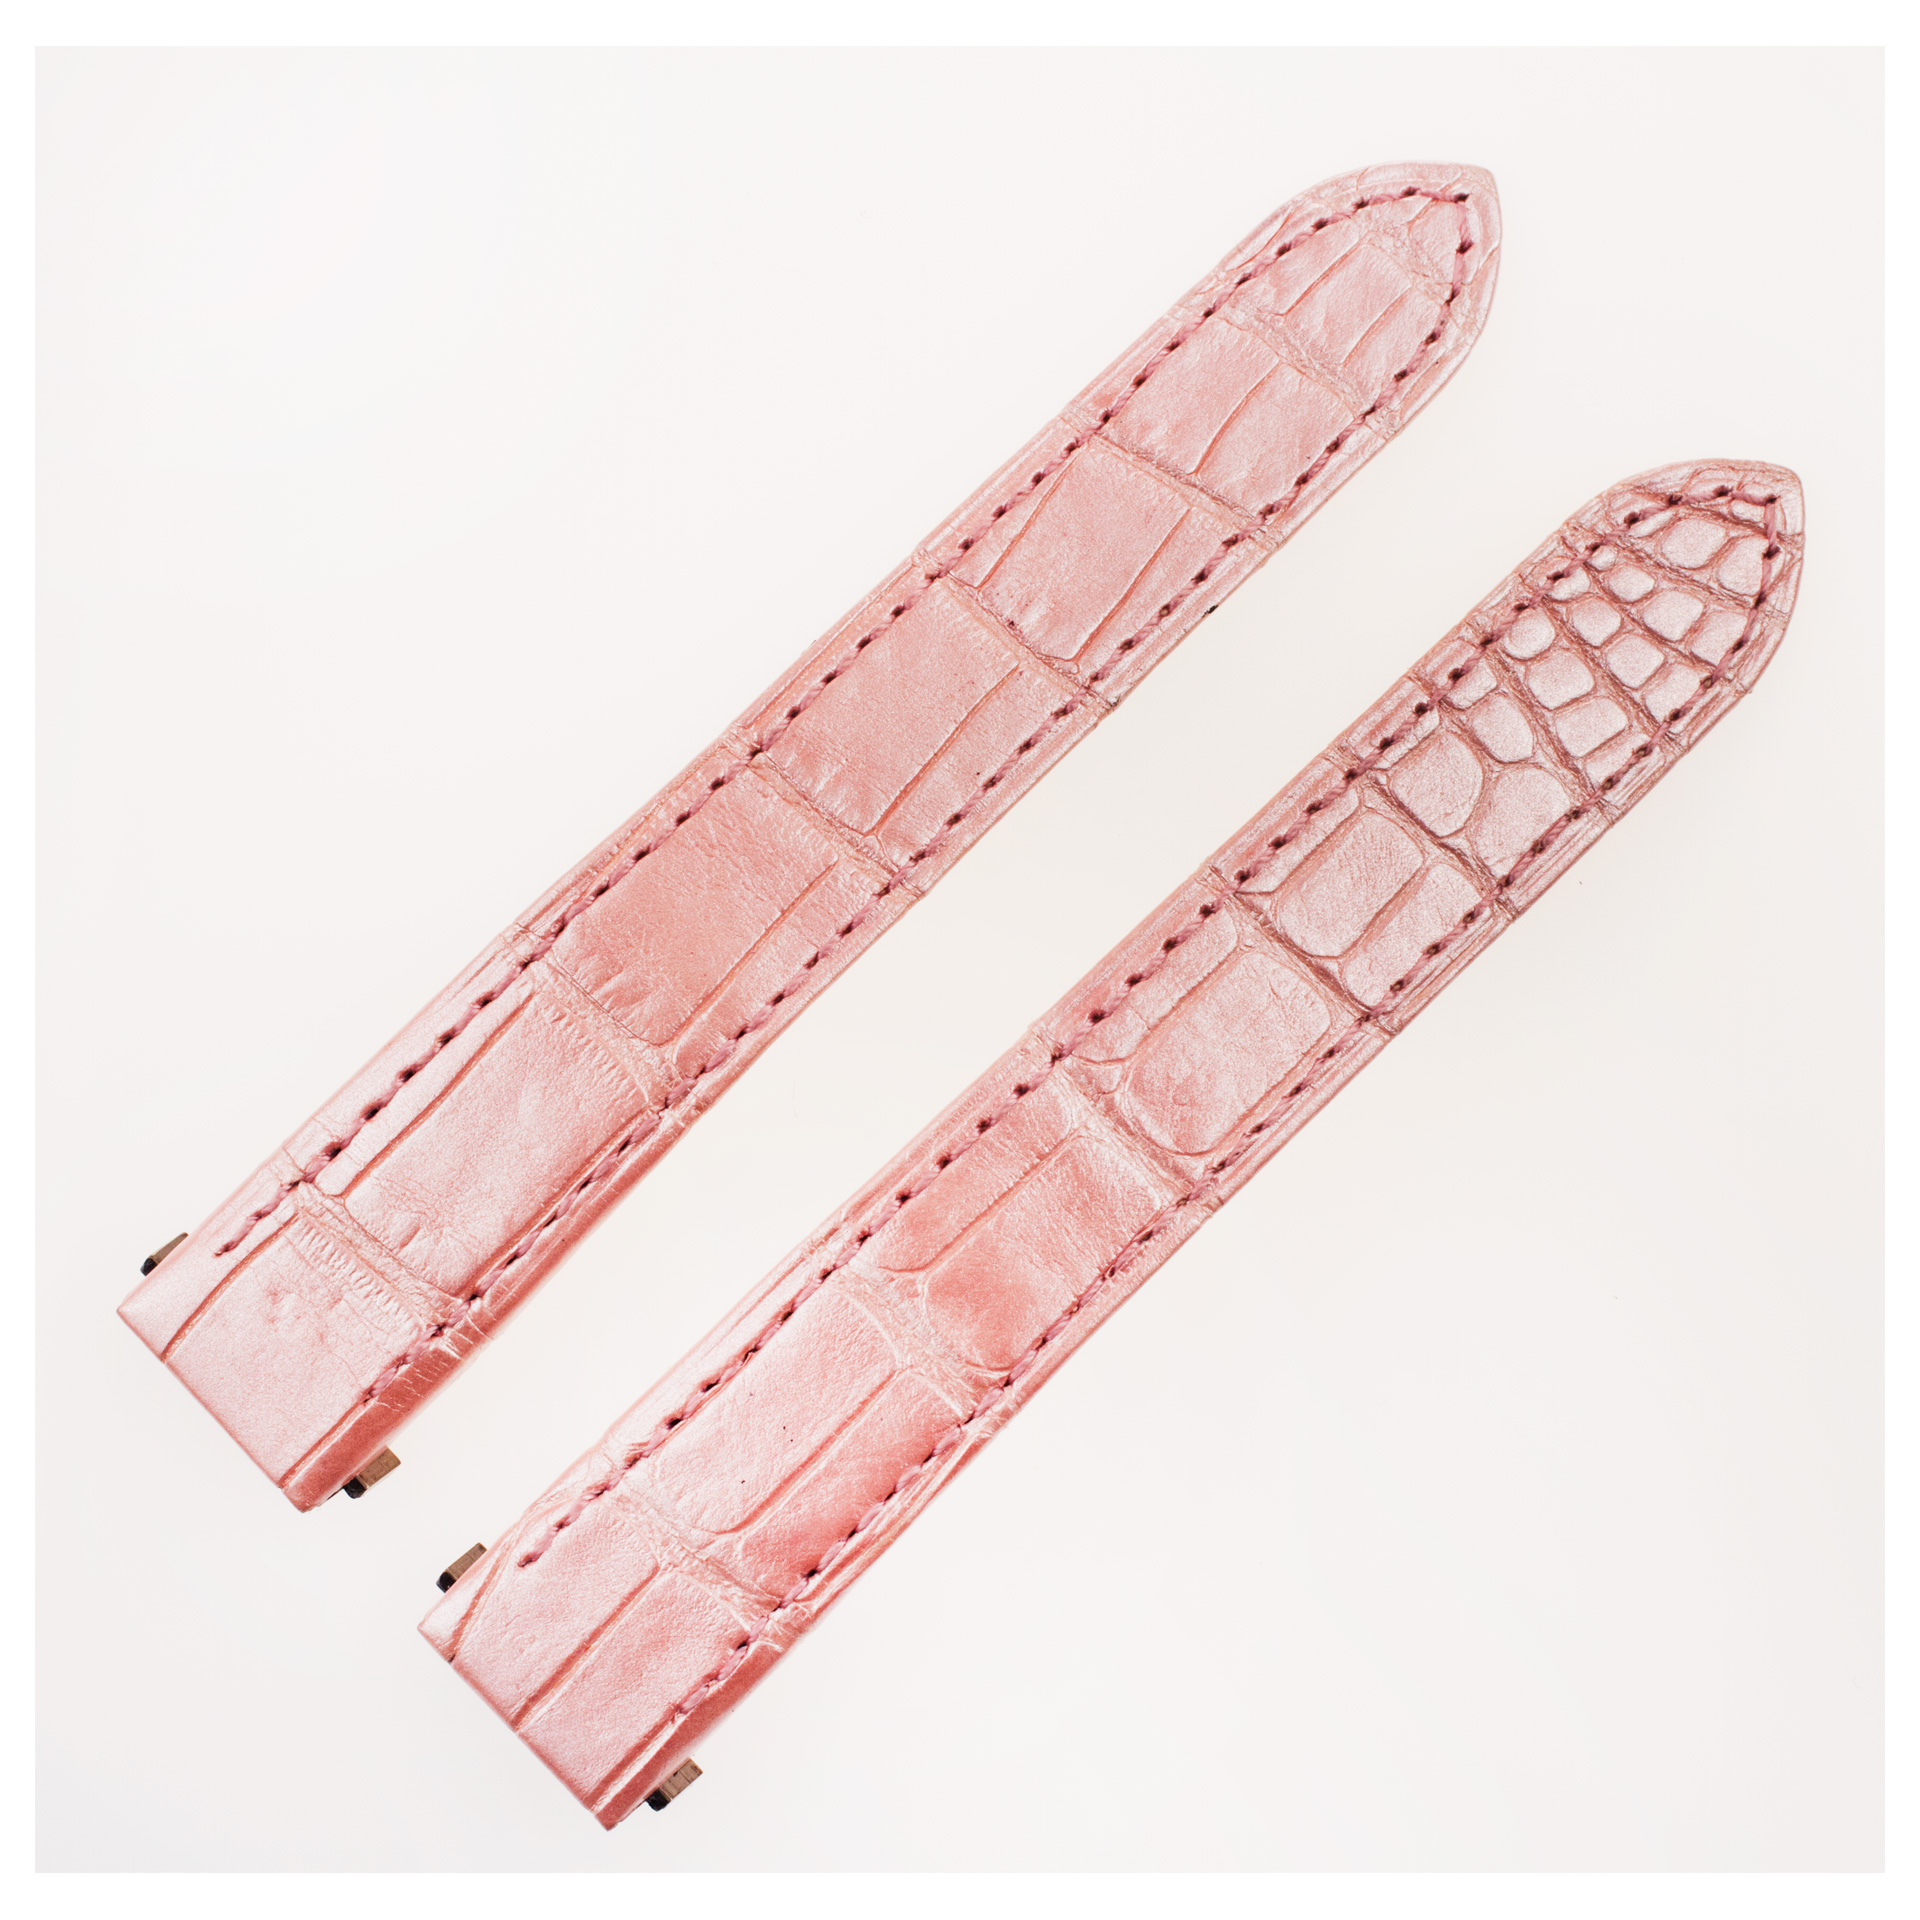 Cartier shiny pink alligator strap by 15mm lug and 4" length image 1